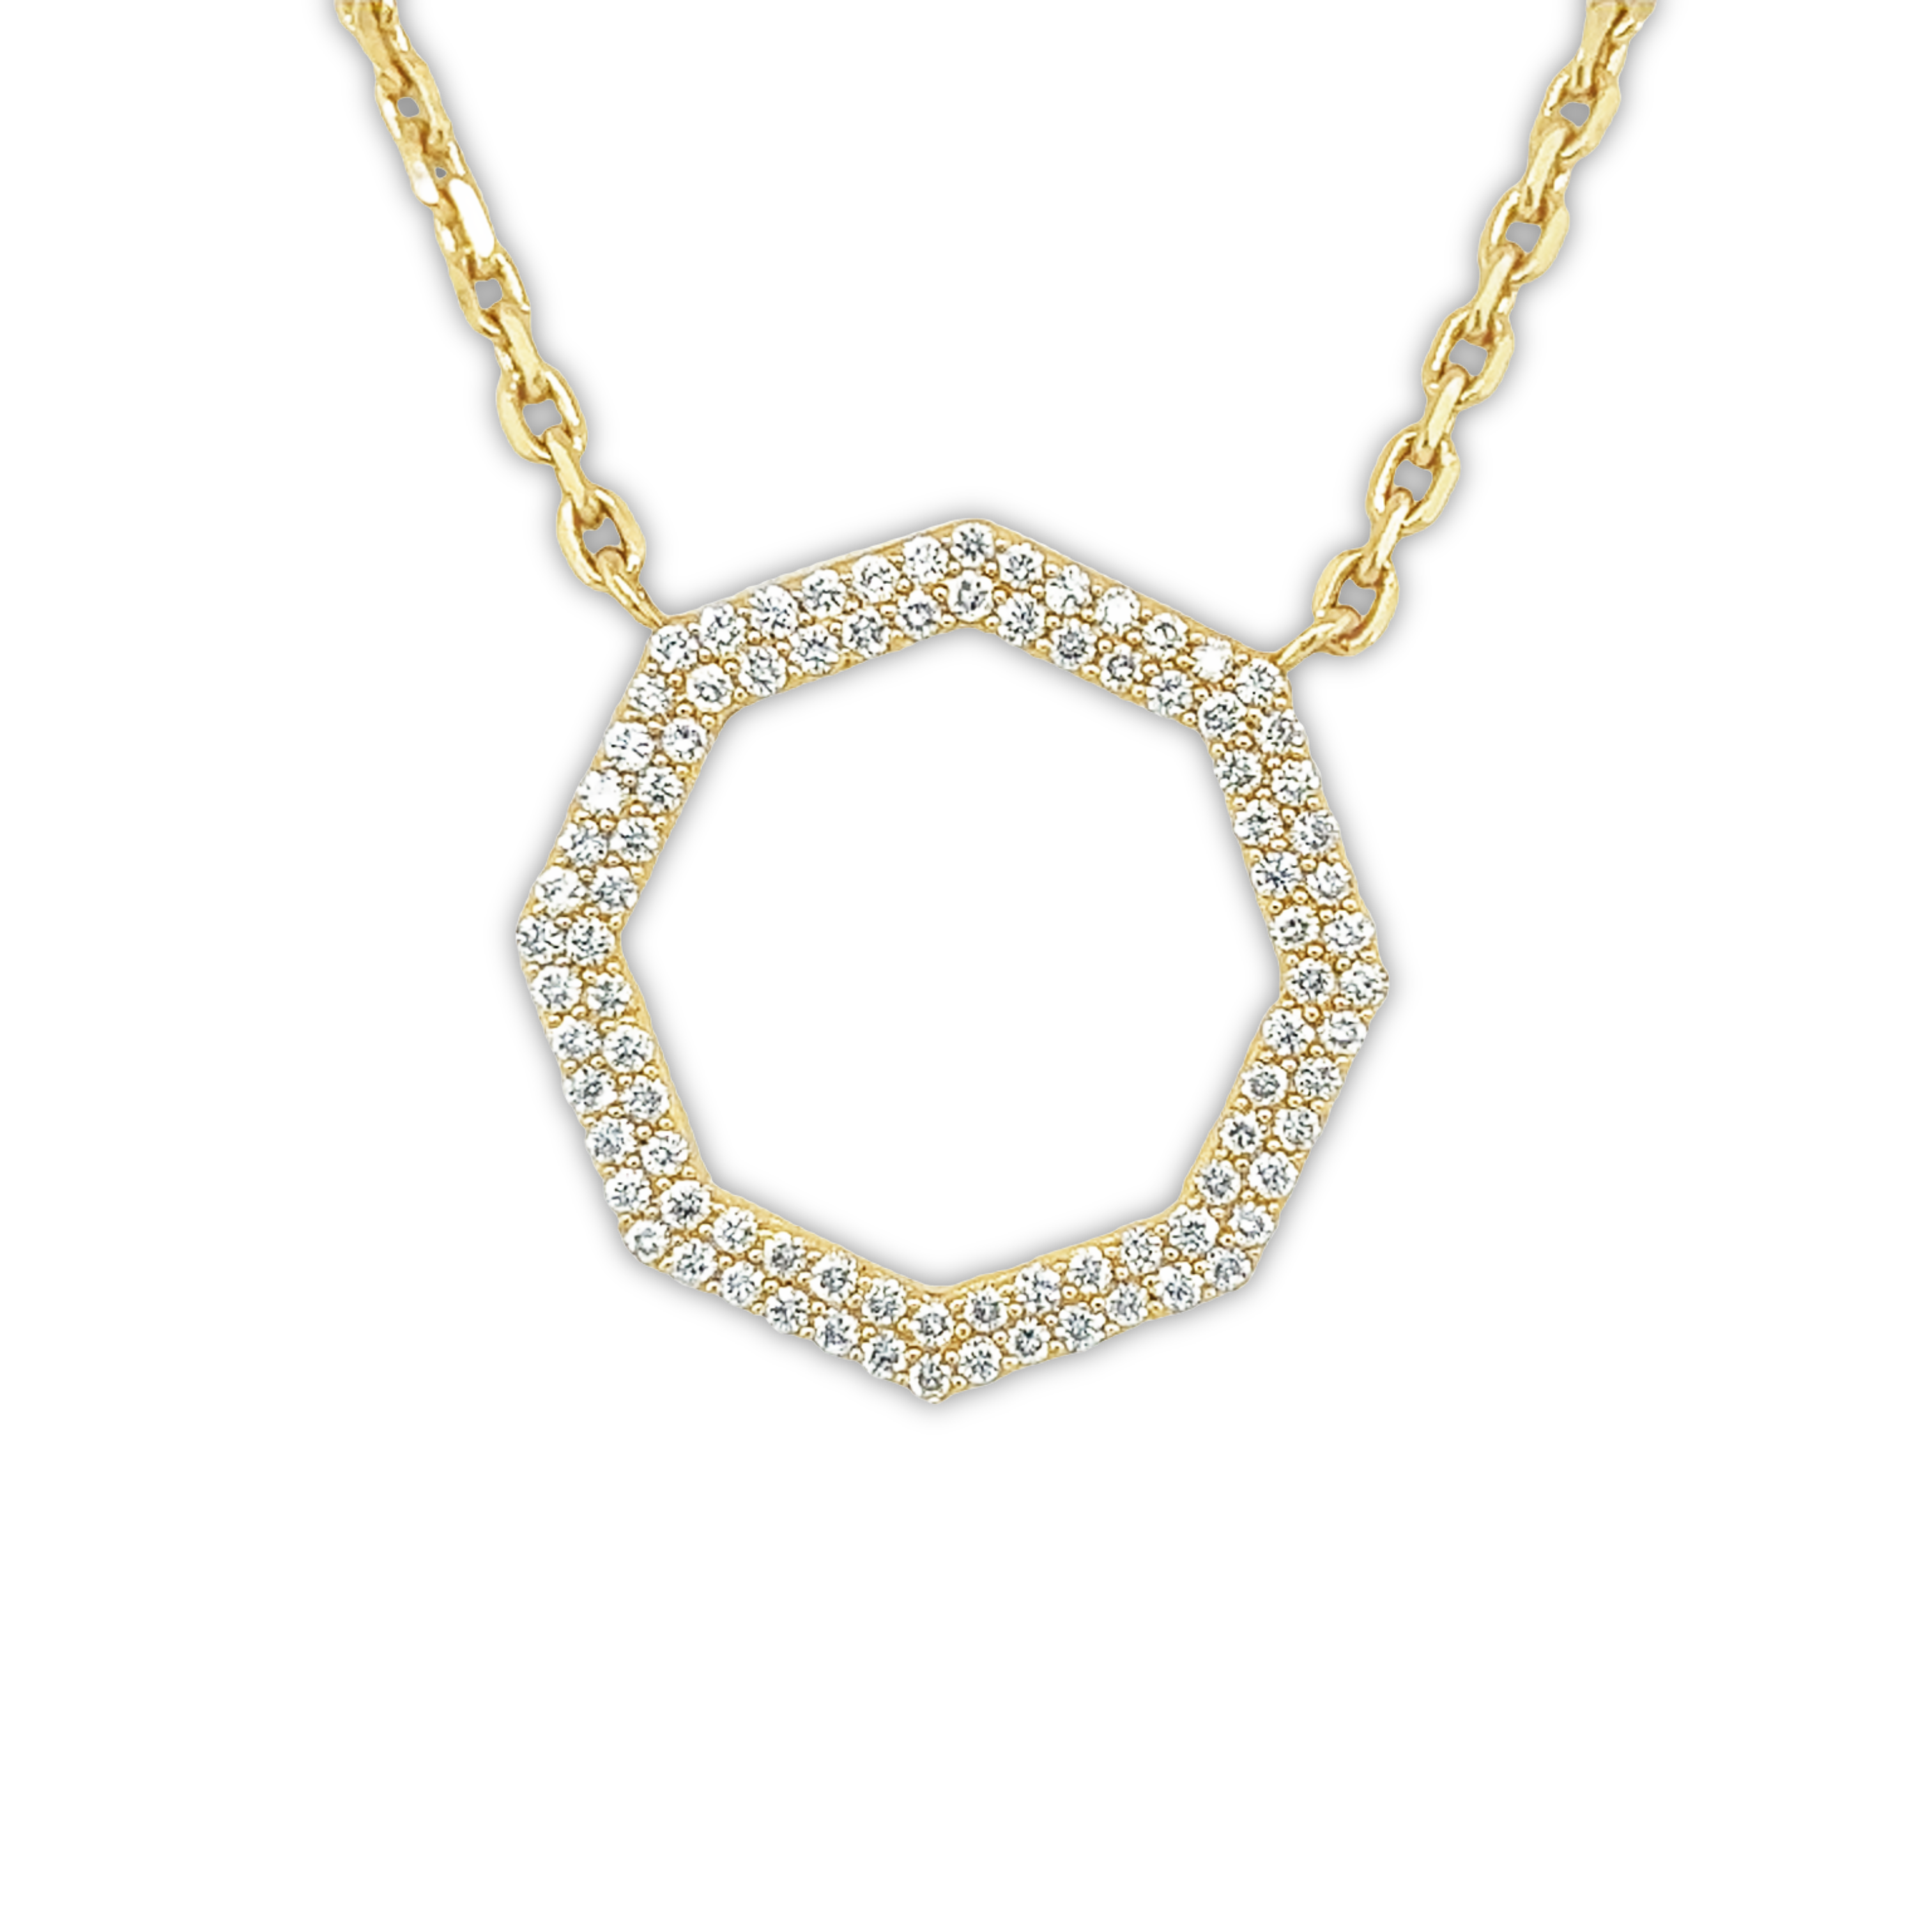 Featured image for “Amazing Octagon Necklace”